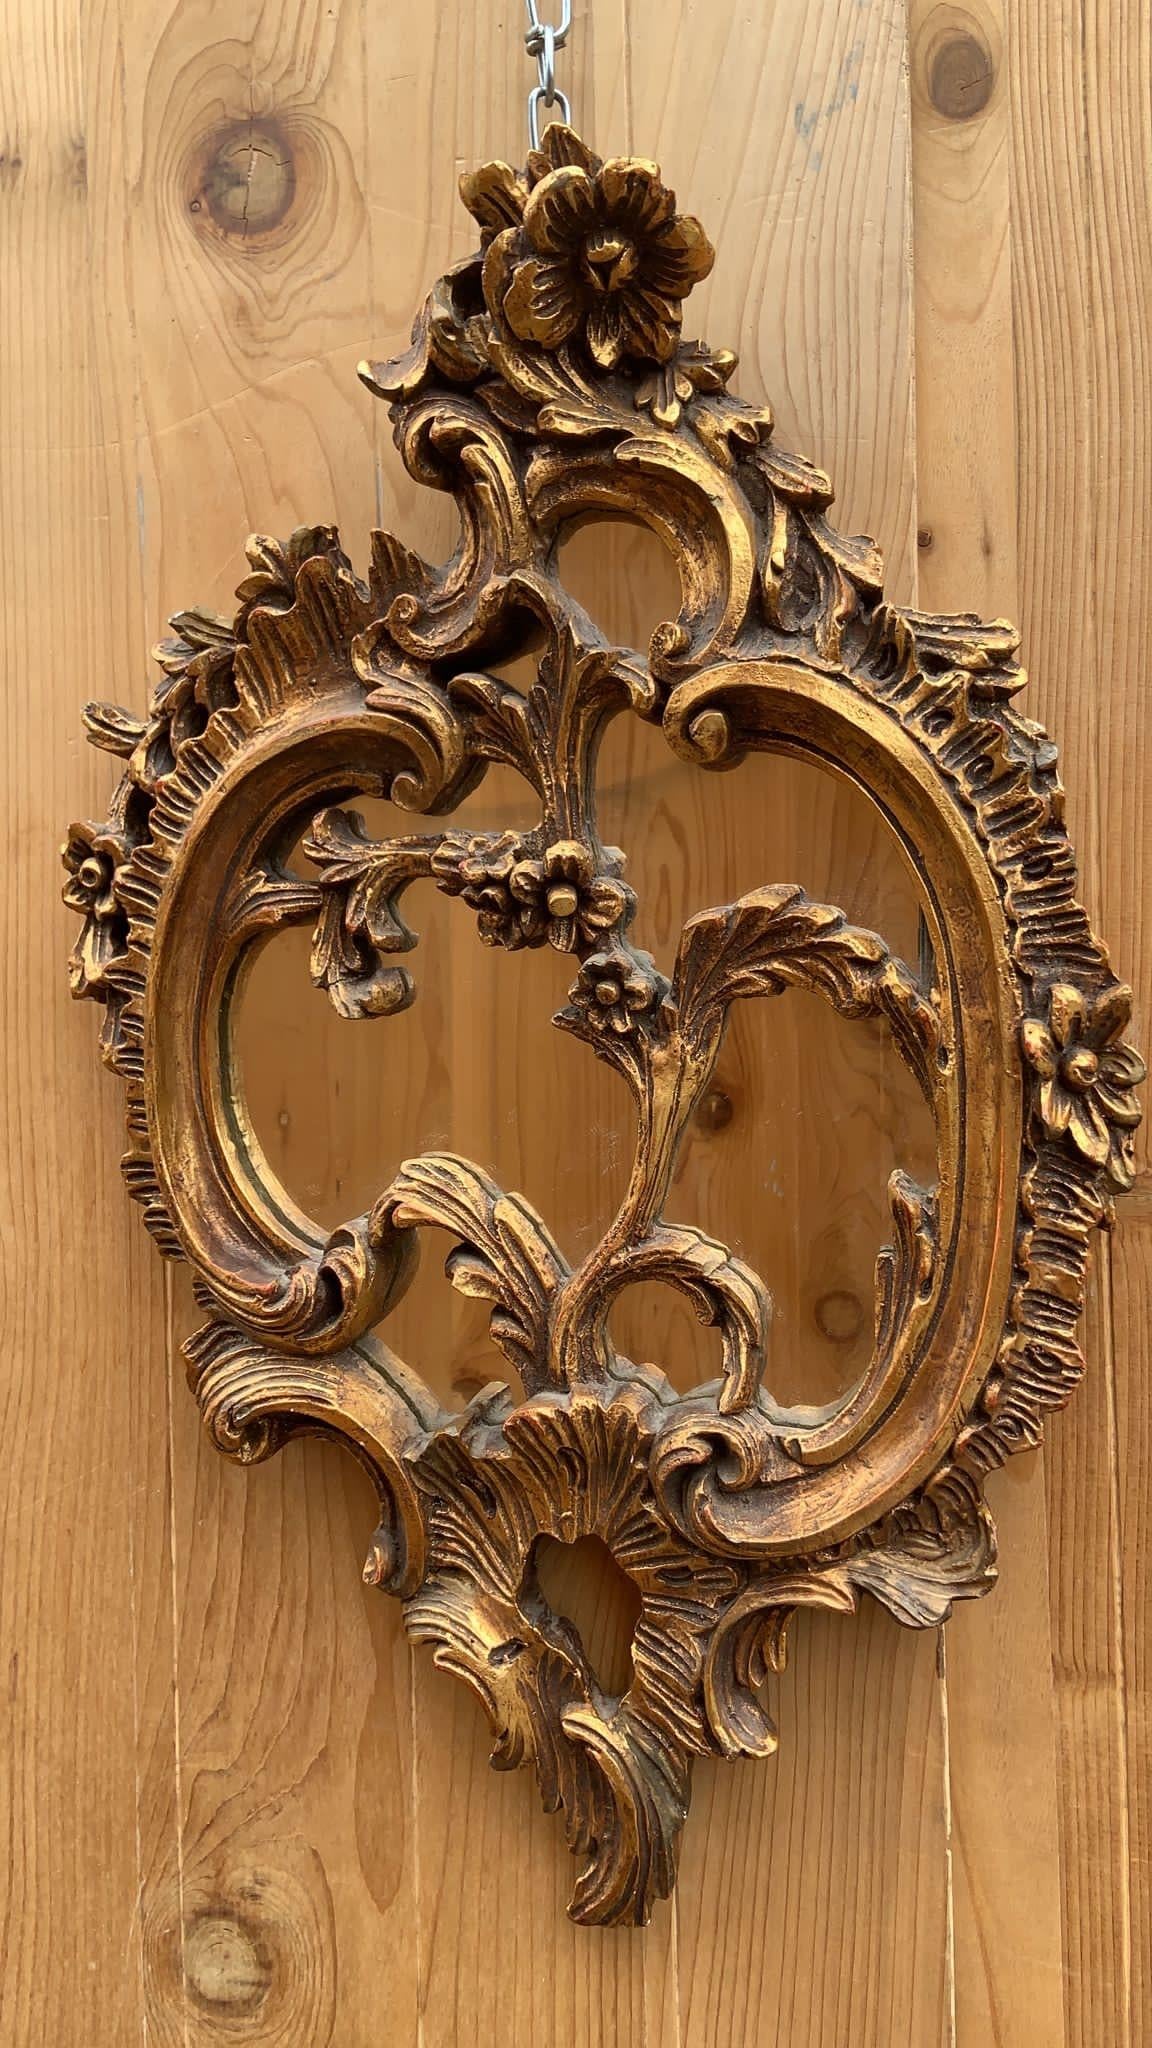 Antique Rococo Italian Carved Ornate Gilt Wall Mirror

An extraordinary Rococo style wall mirror with floral carvings!  It is truly an exceptional piece!

Circa 1900's

Dimensions :
H 25